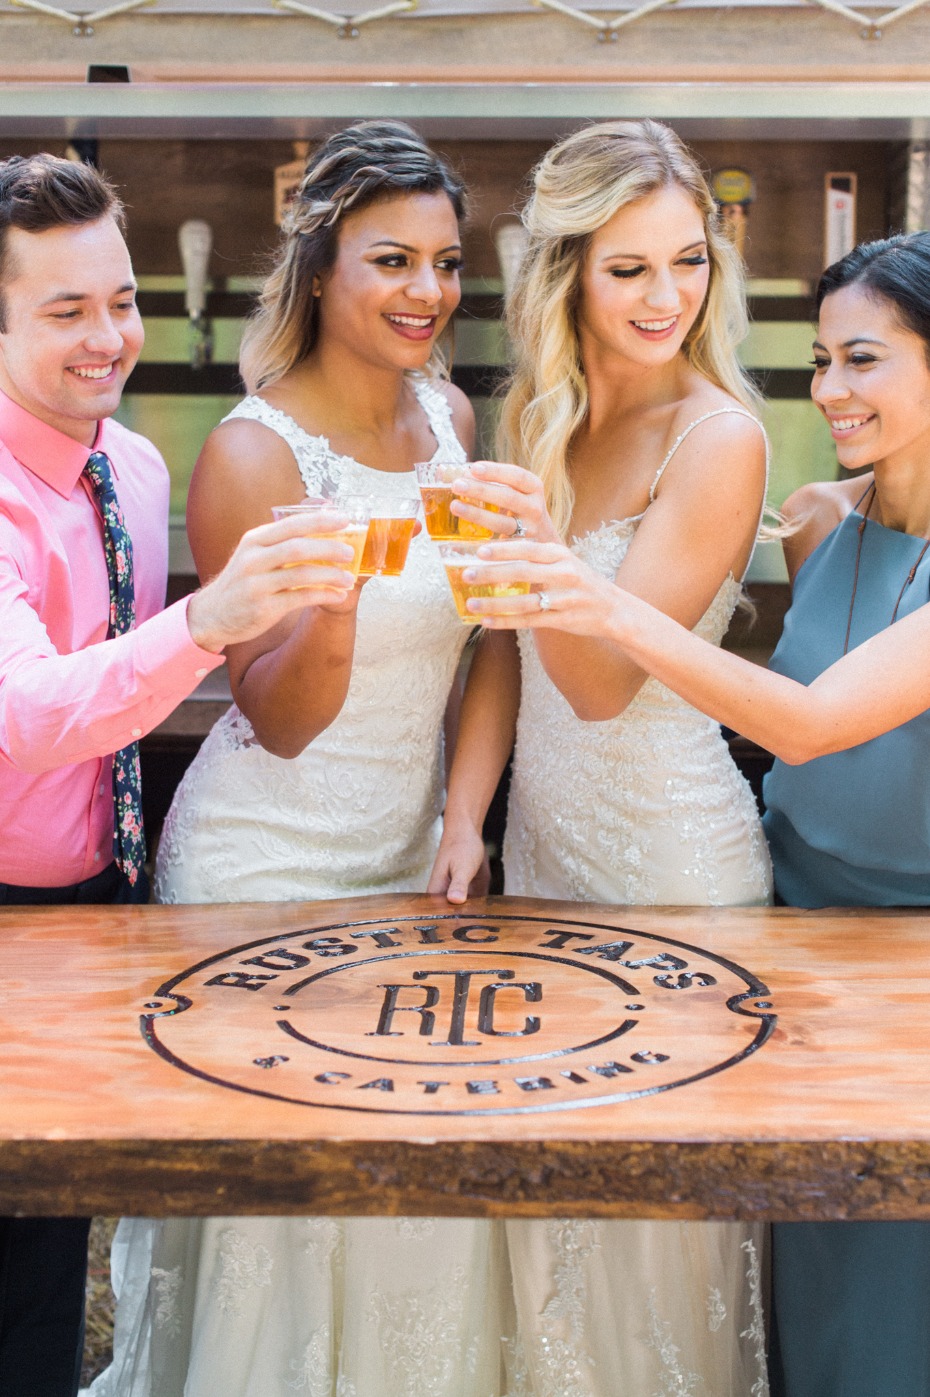 Cheers to this woodsy wedding